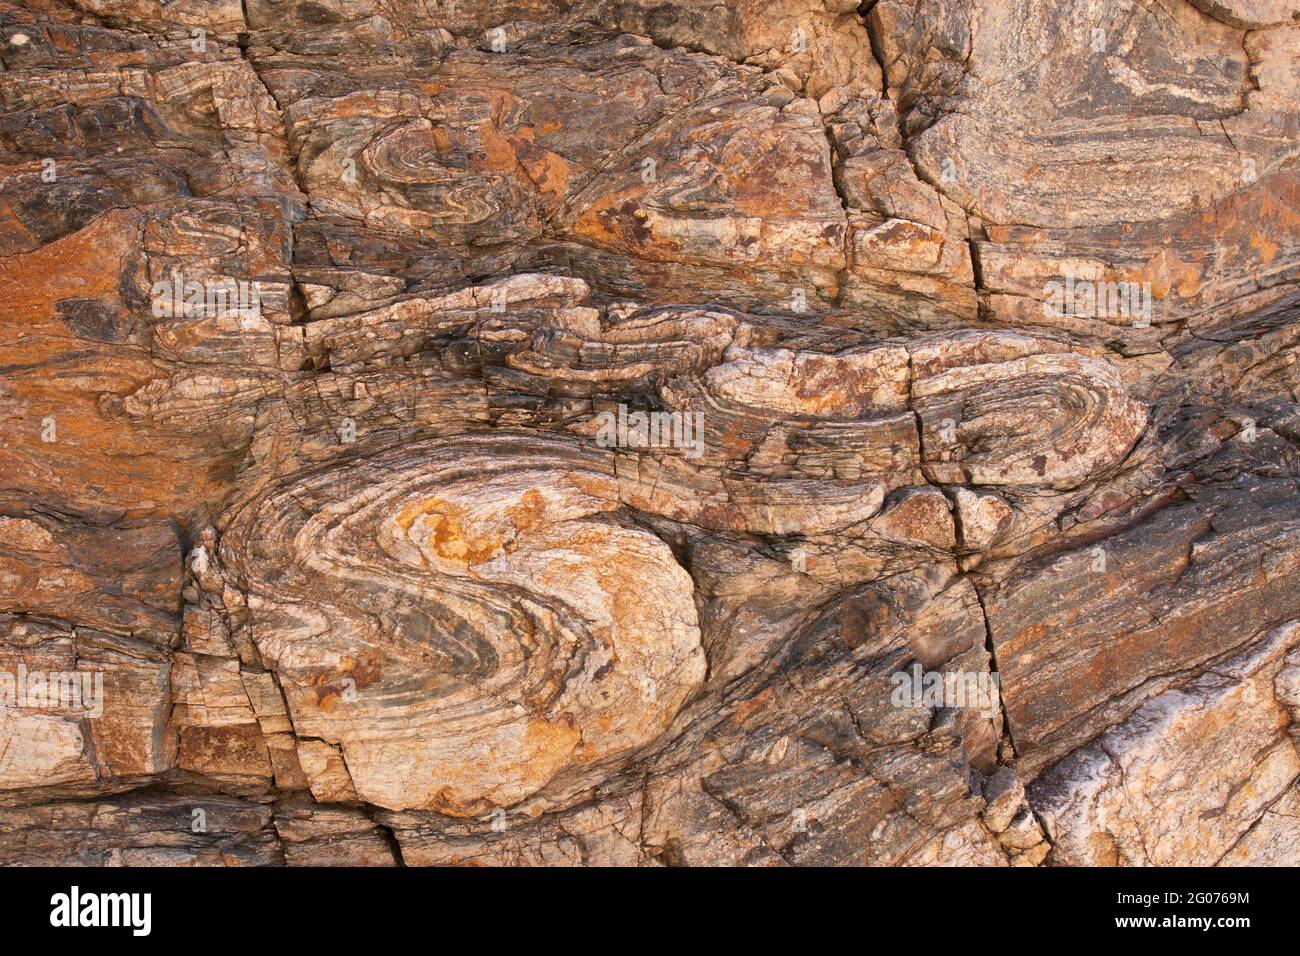 Ductiley deformed Proterozoic basement gneiss, southeastern California, USA. View is about 2 meters across. Stock Photo